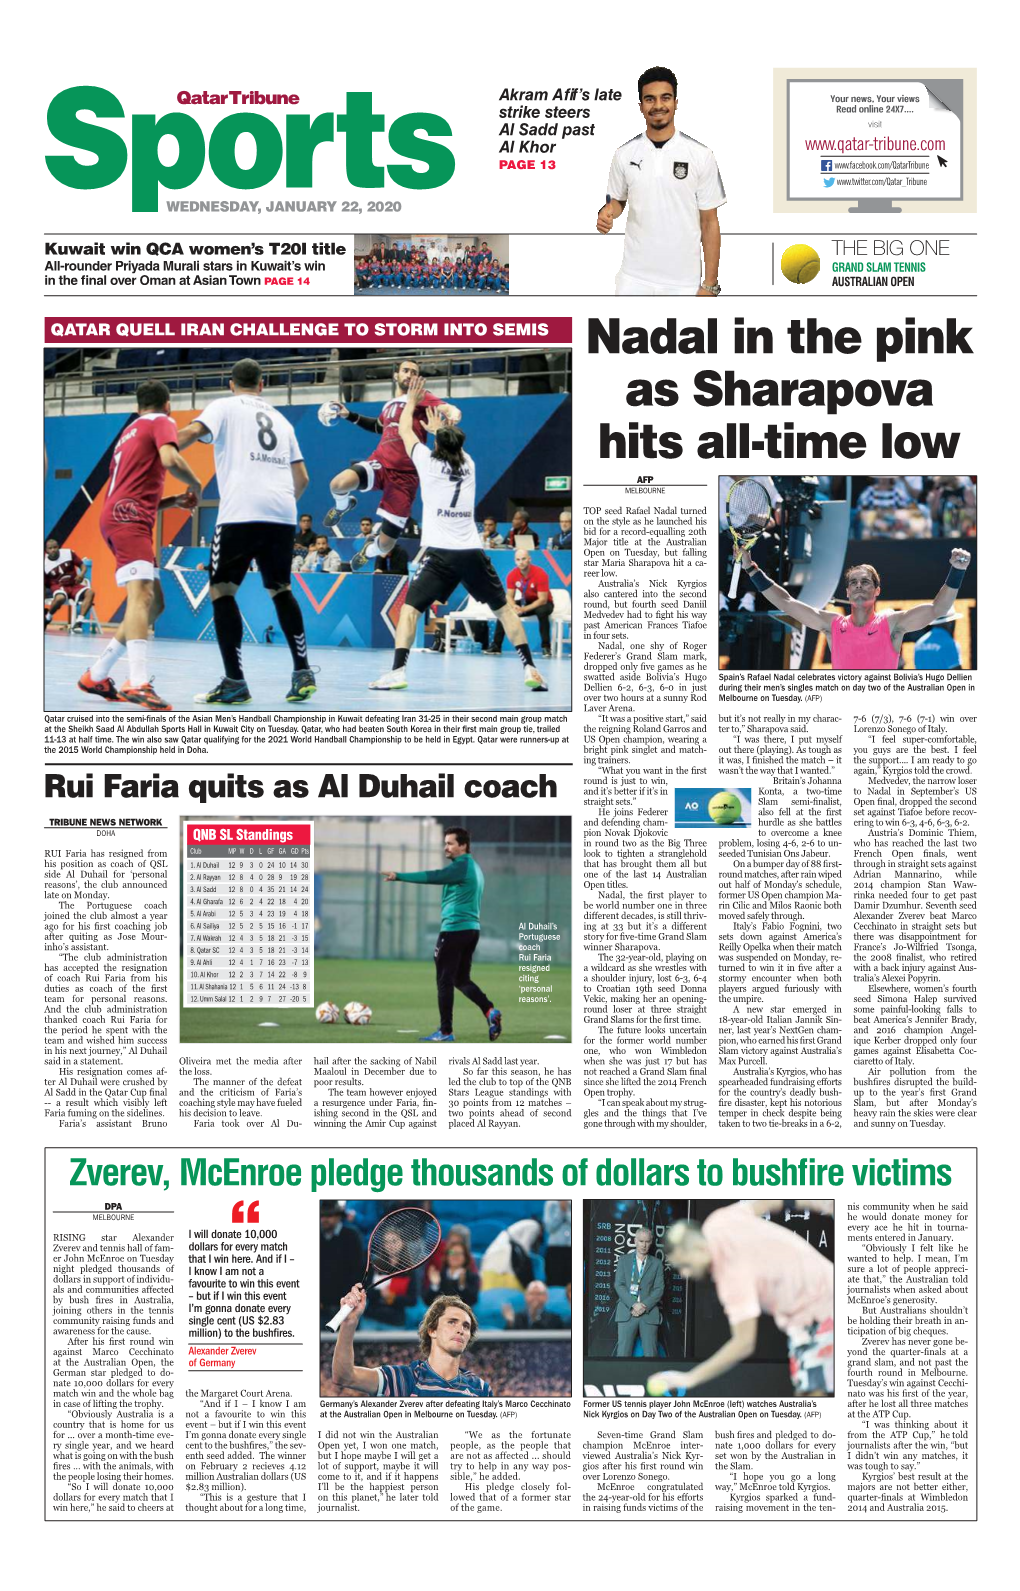 Nadal in the Pink As Sharapova Hits All-Time Low AFP Melbourne